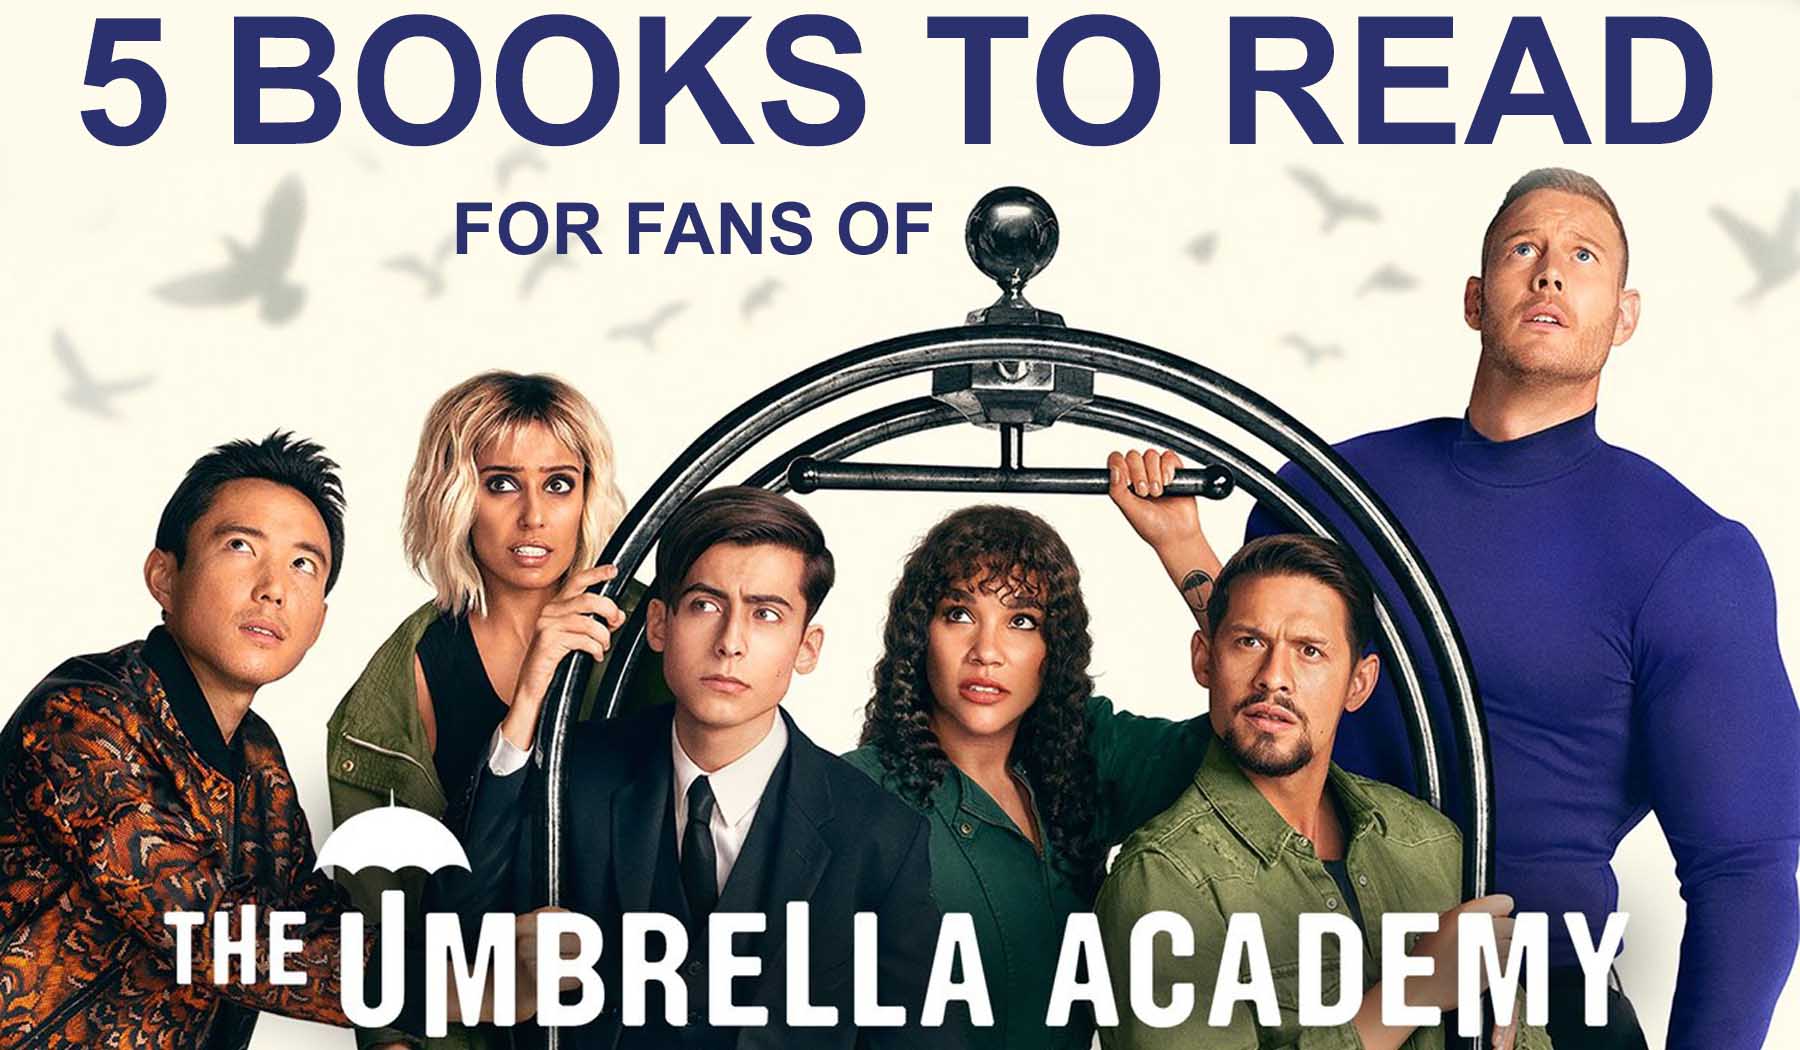 5 books to read for fans of the umbrella academy